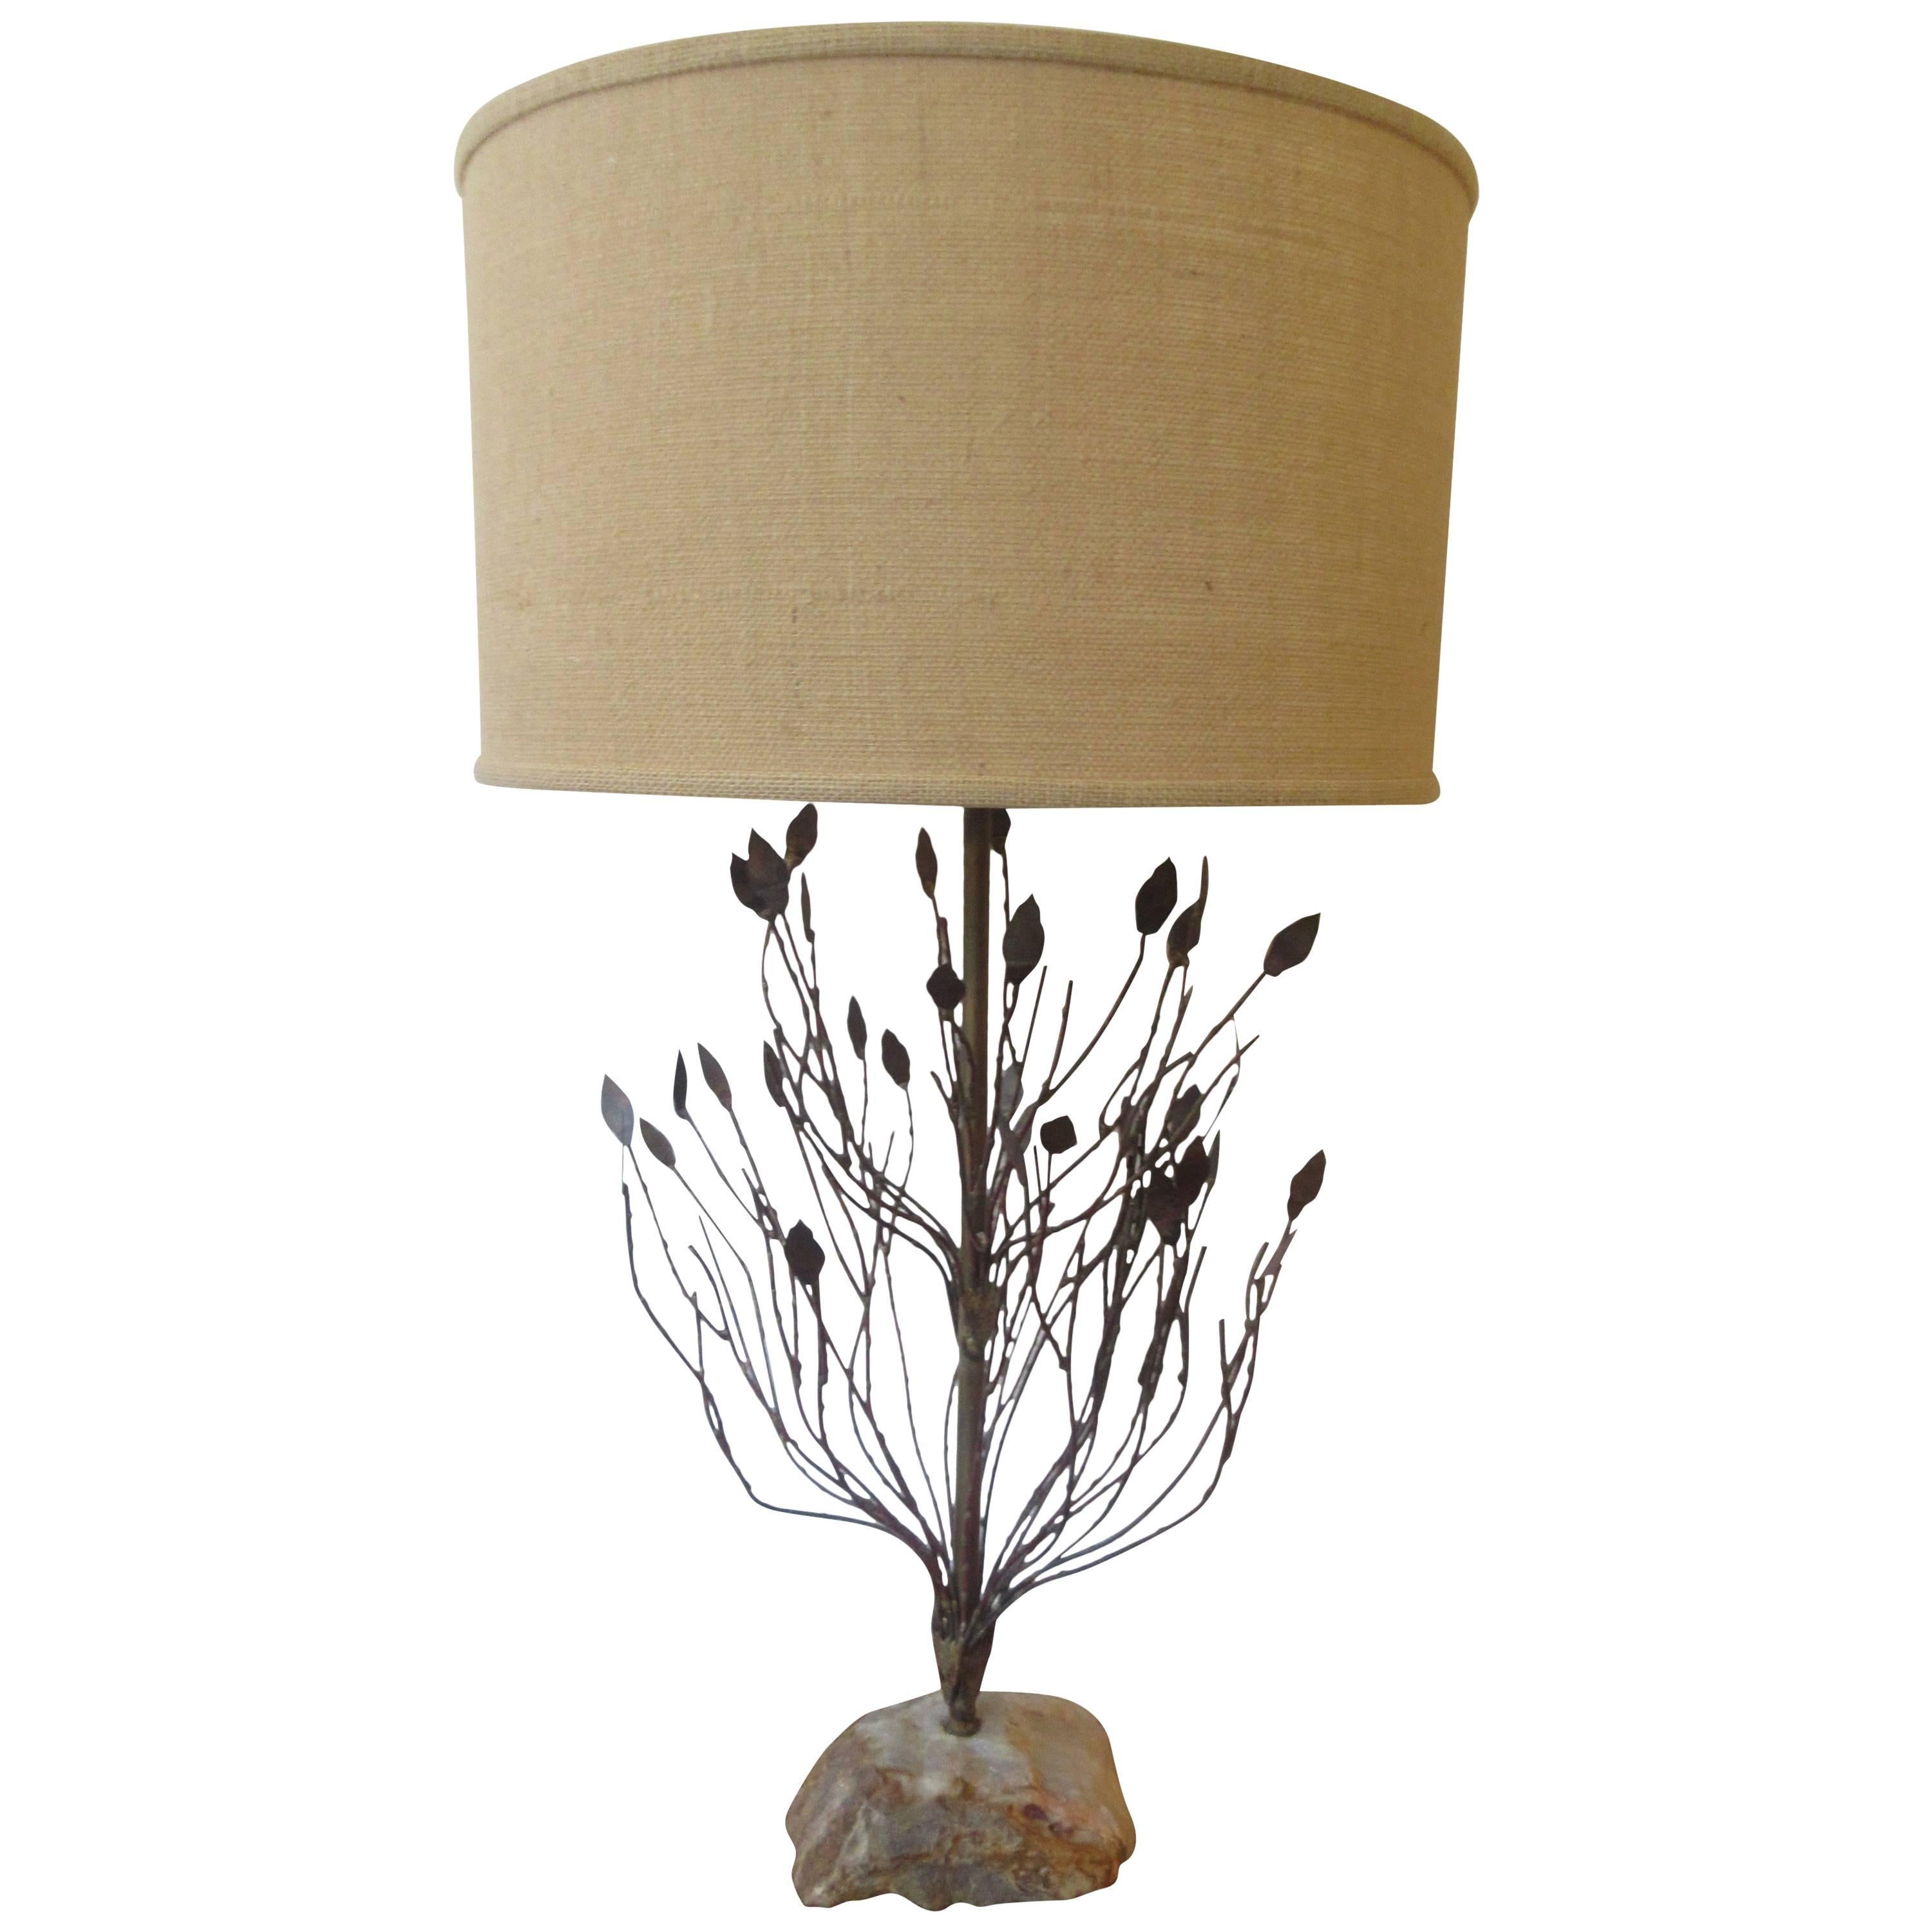 Silas Seandel or Curtis Jere Style Lamp